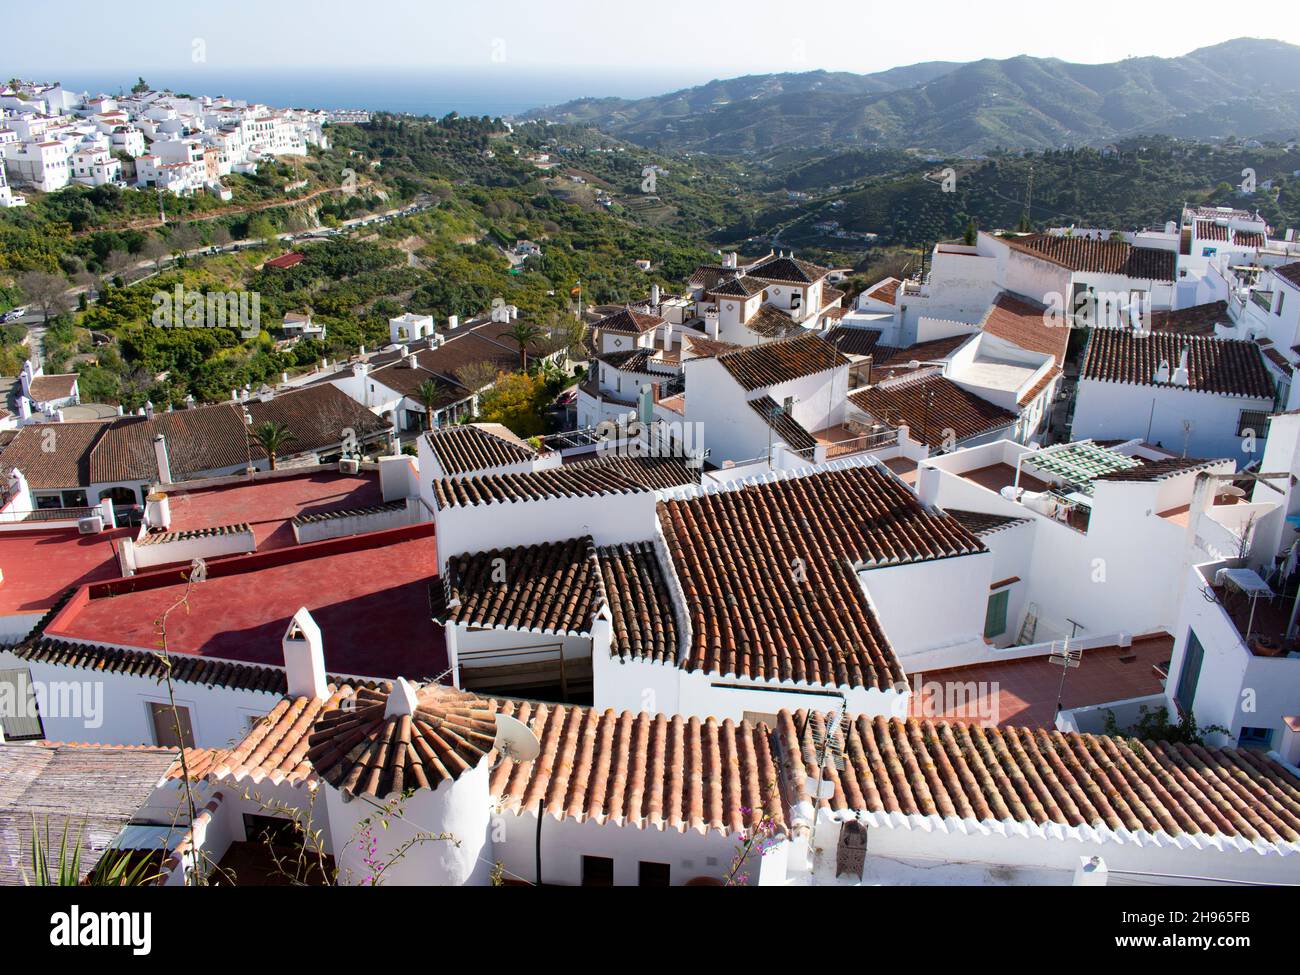 Beautiful charming Frigiliana village Spain. View of the rooftops of the charming old town.  Landscape aspect shot. Stock Photo